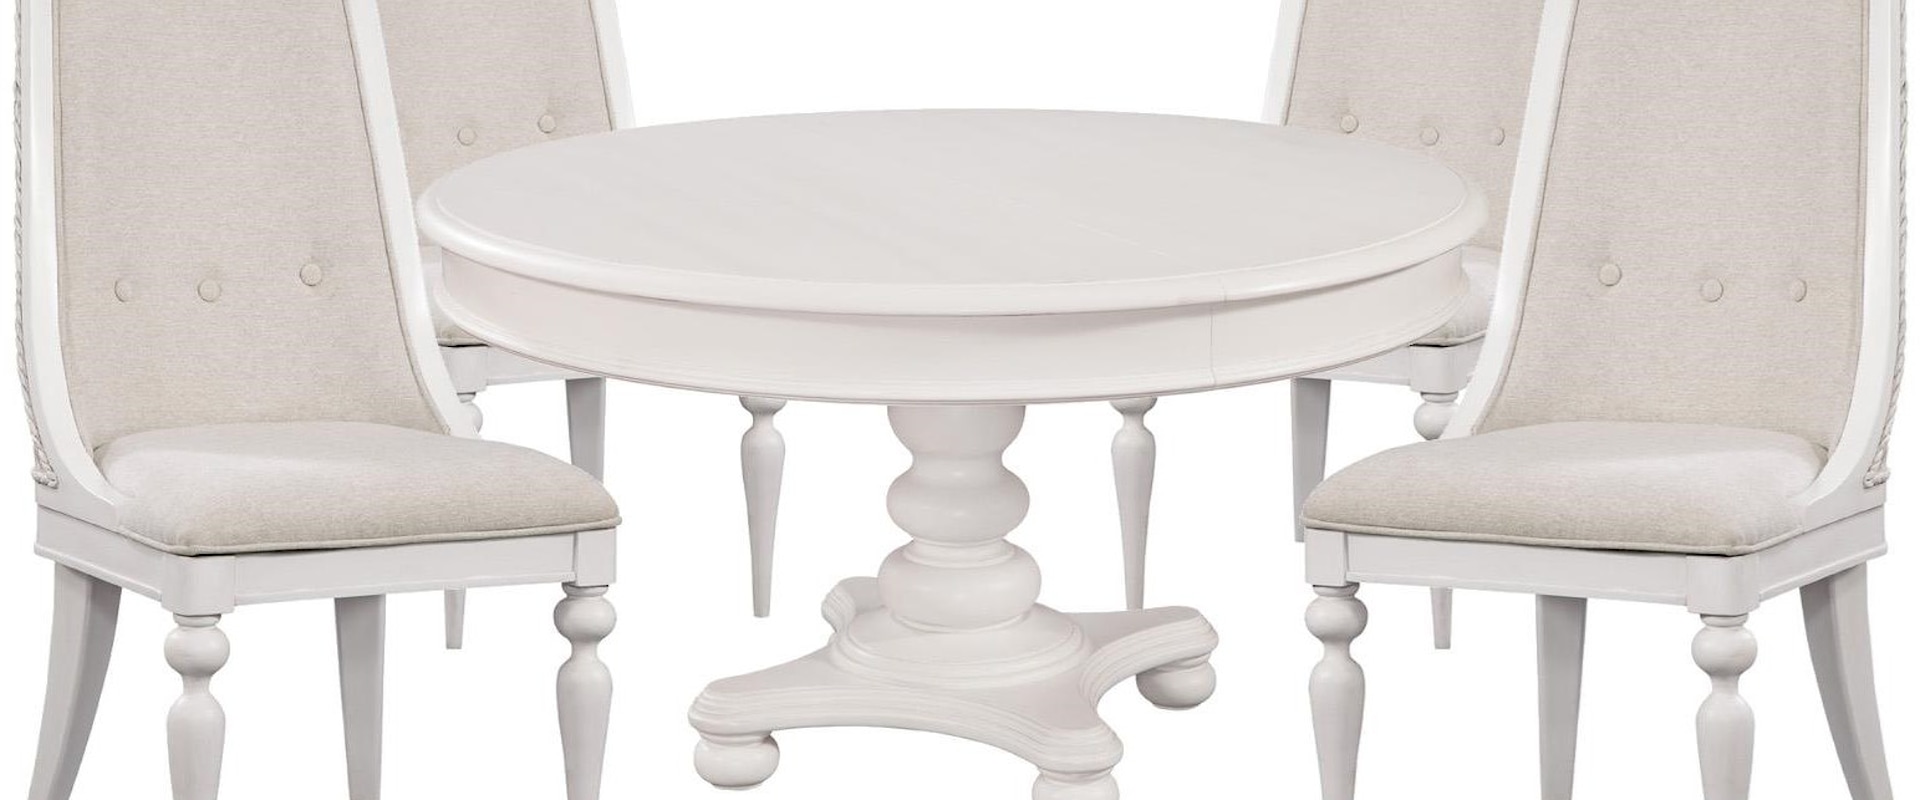 Oval Pedestal Table and 4 Woven Side Chair